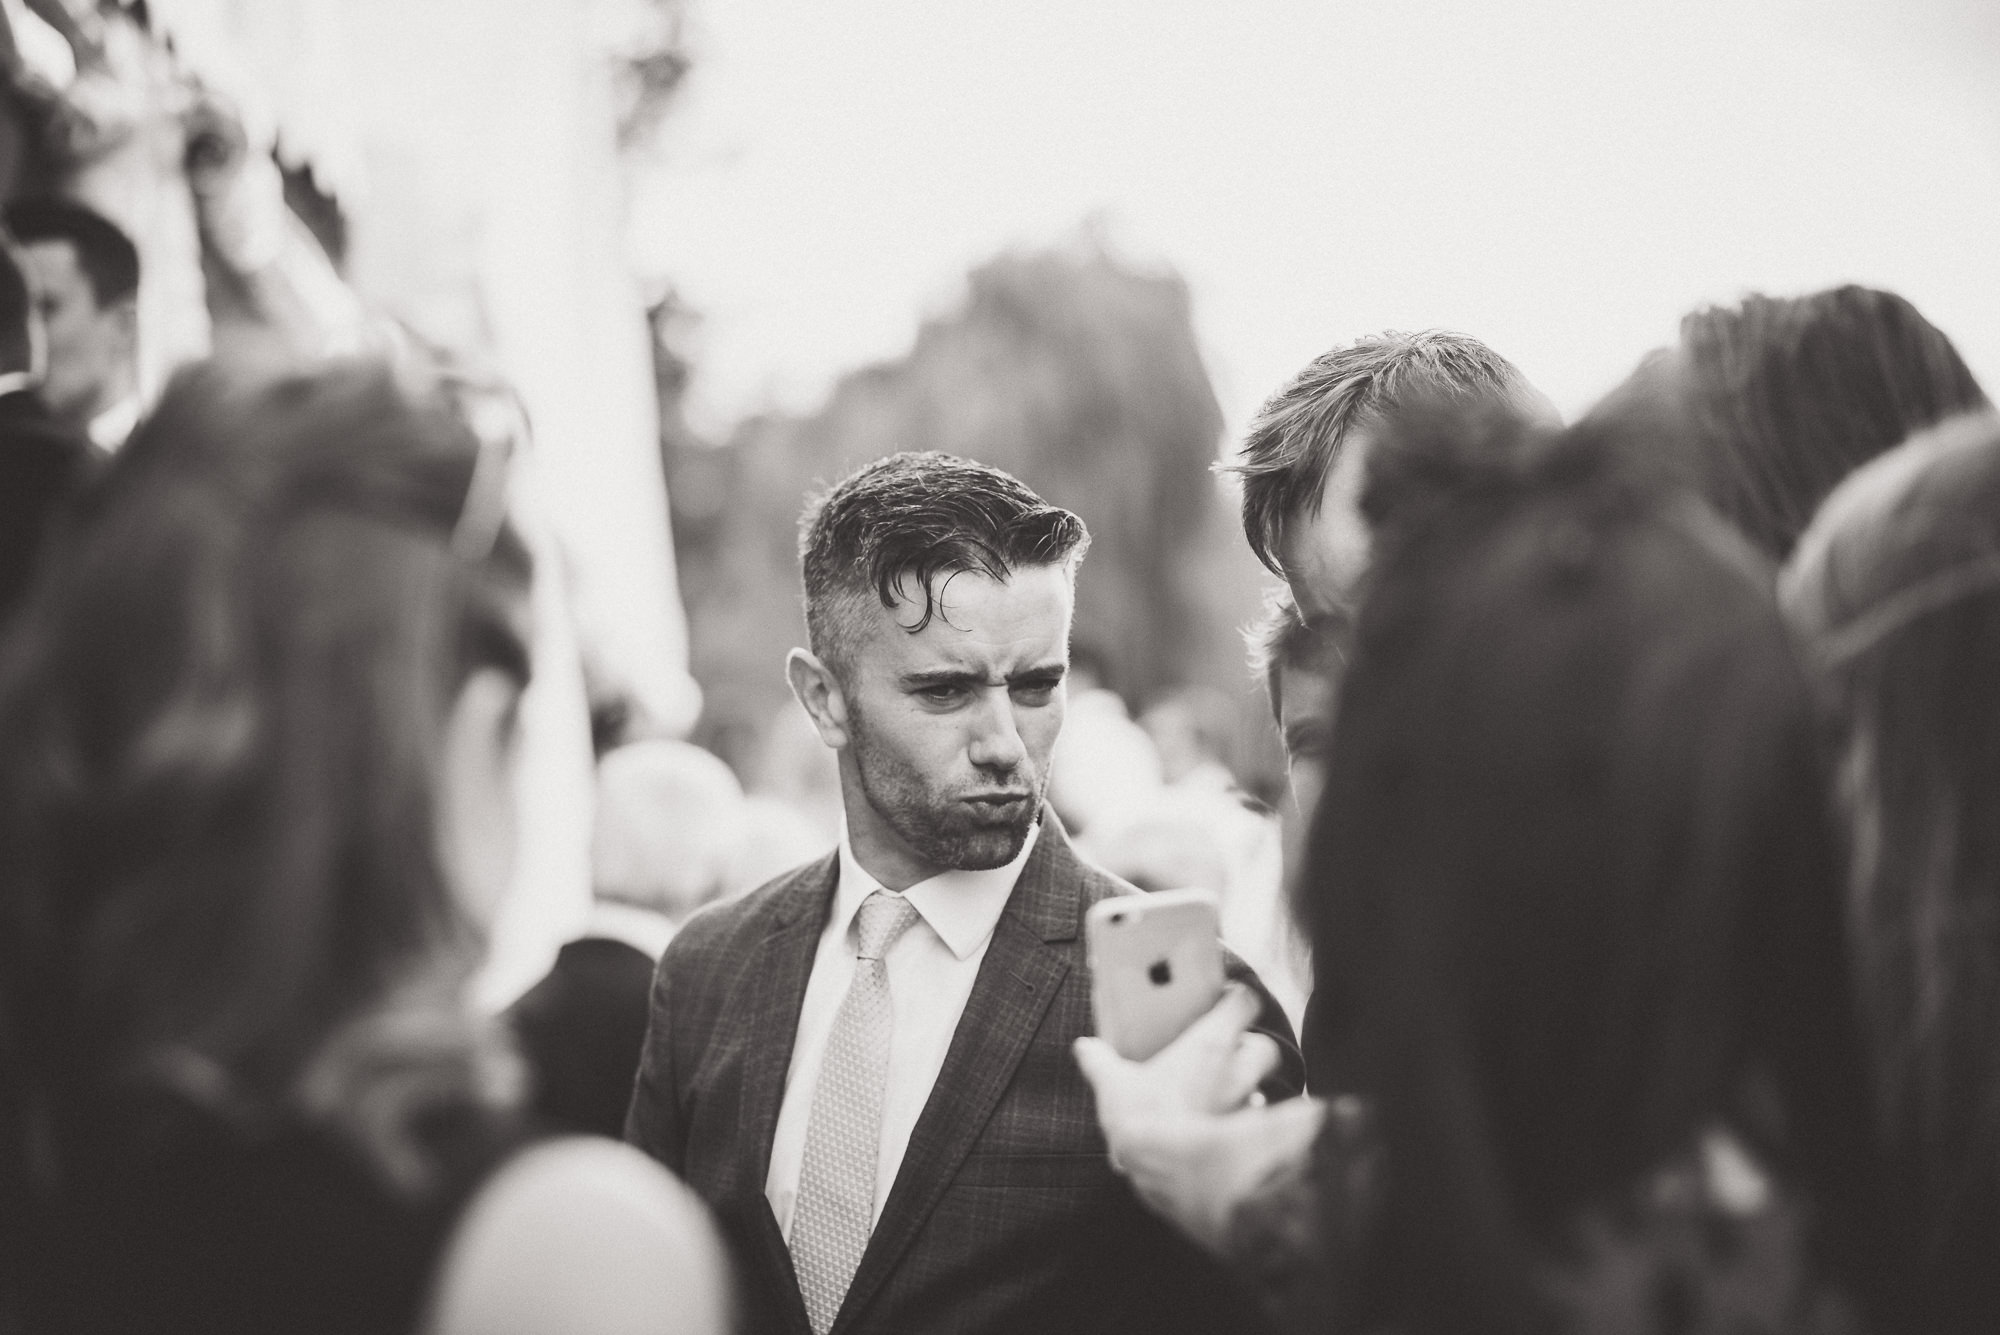 A groom in a suit looking at his phone.